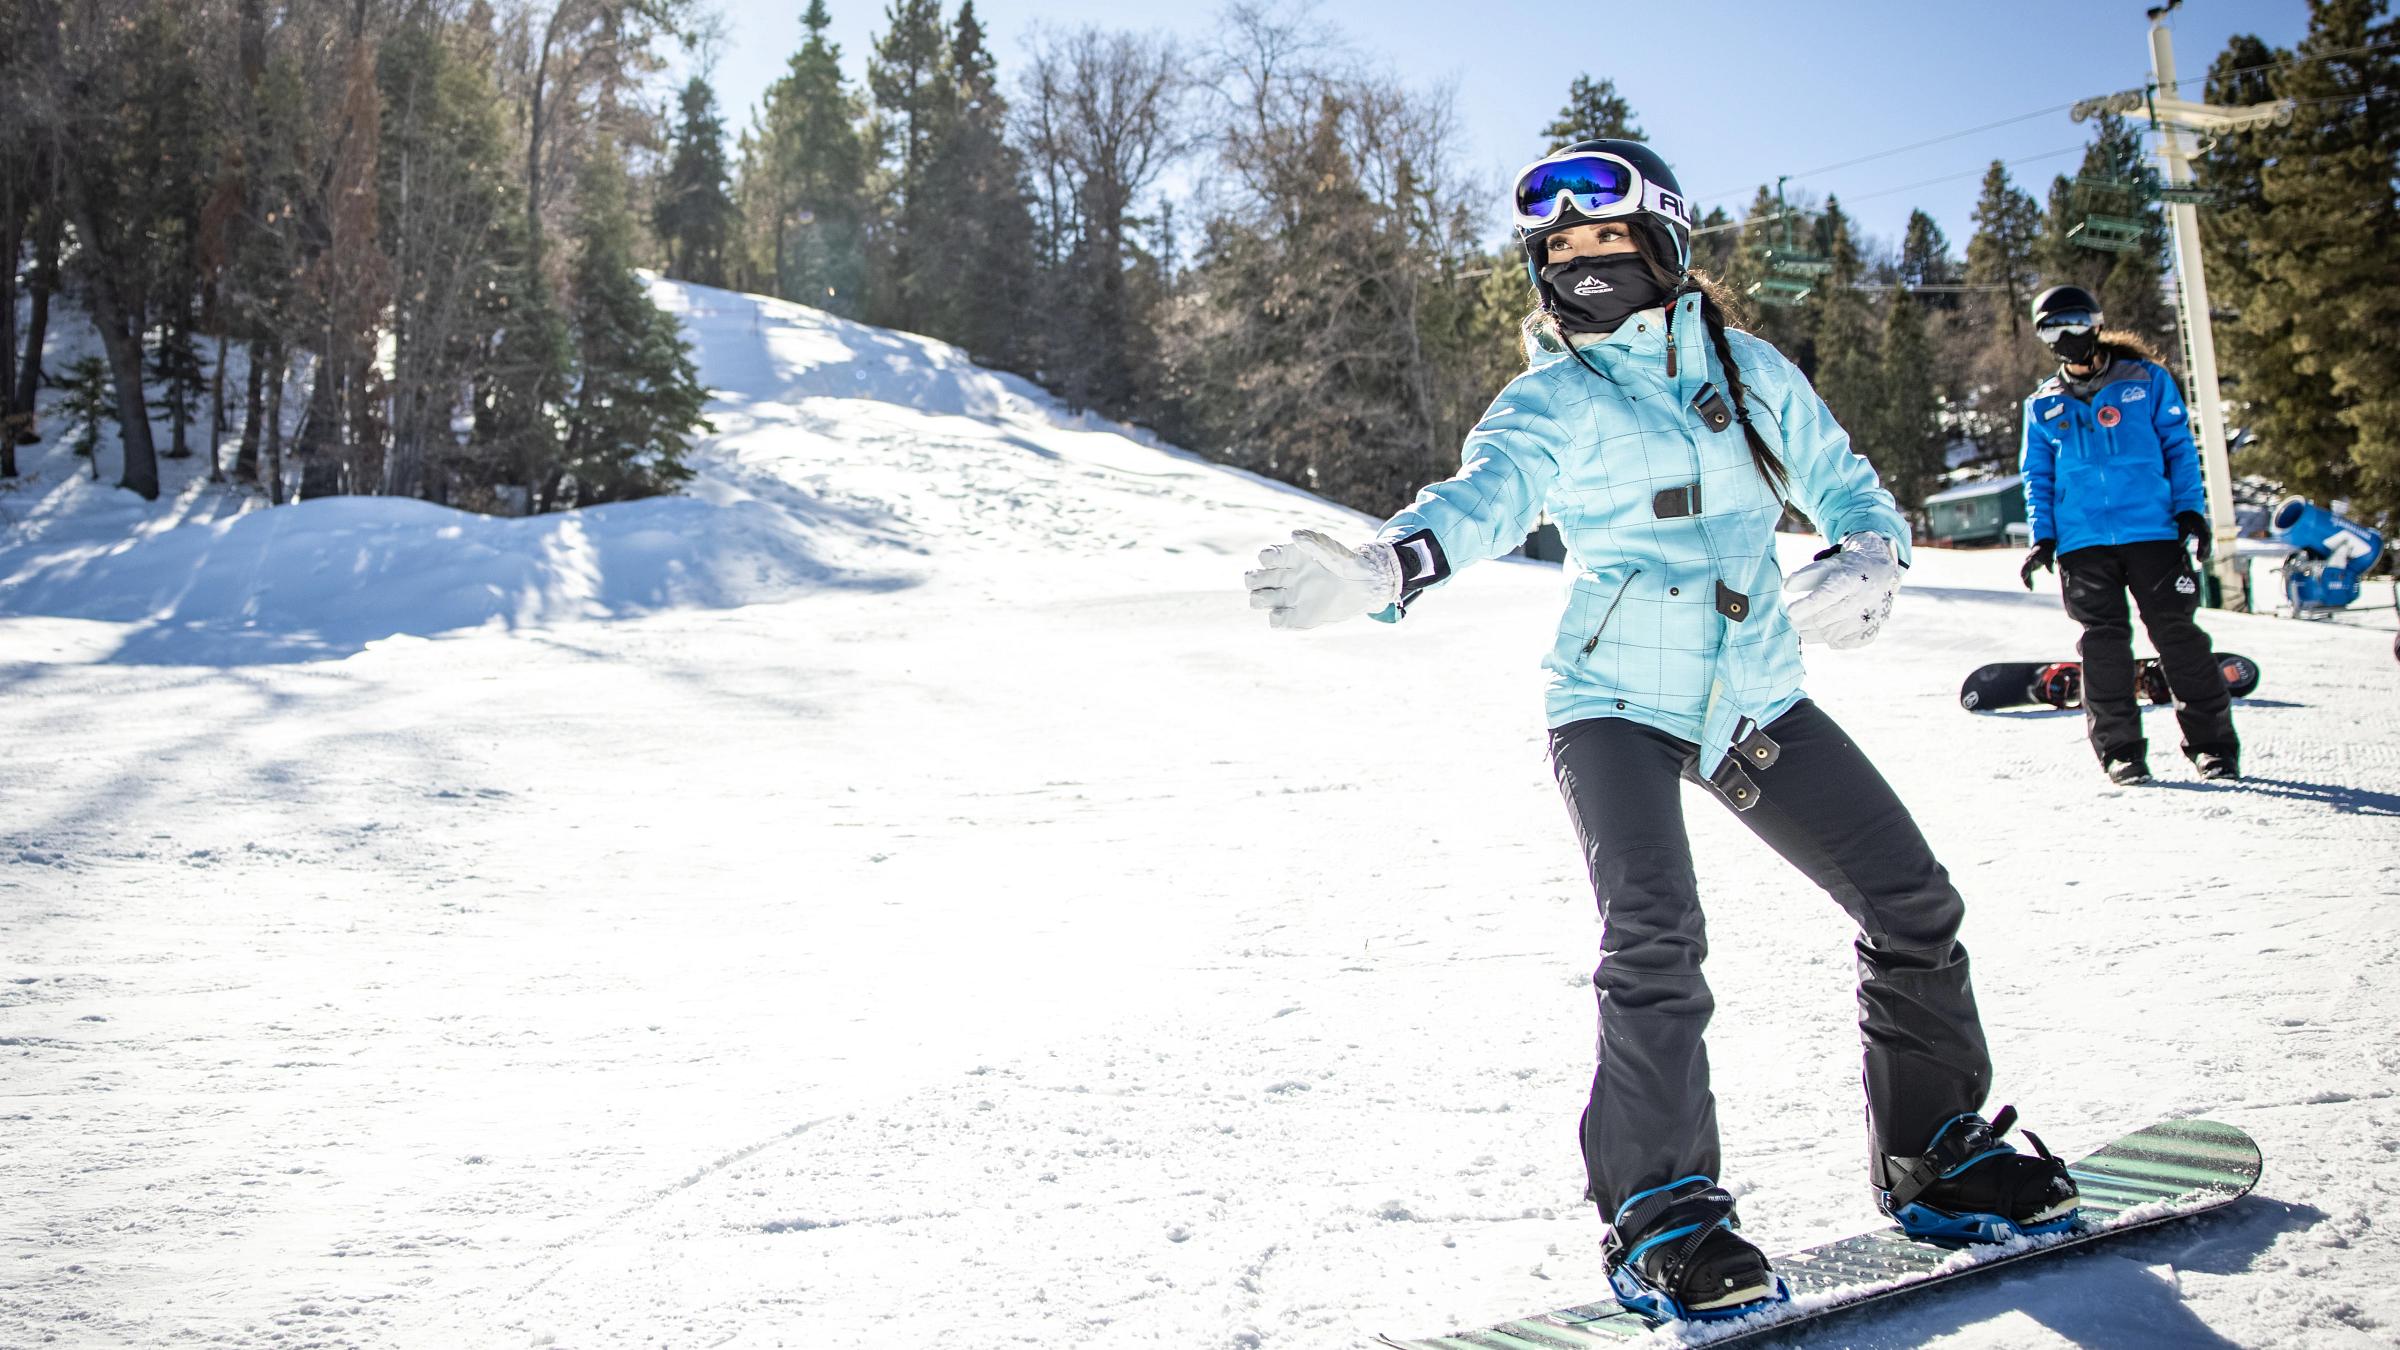 Girl taking a snowboard lesson, raising arm to point in a direction.